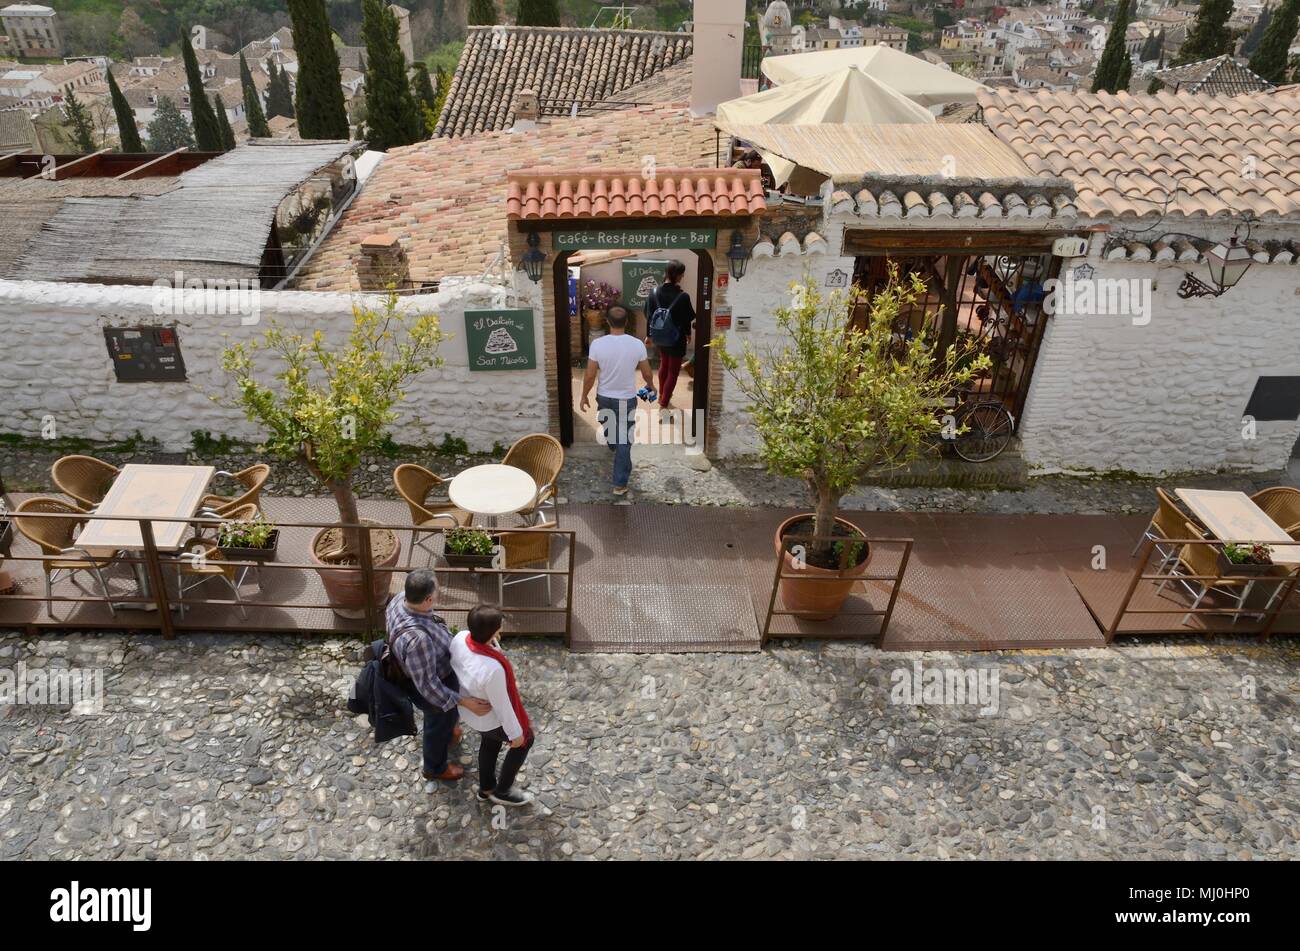 People going into a restaurant seen from the viewpoint of Saint Nicholas  in the Albaicin district of   Granada,  Andalusia, Spain. Stock Photo